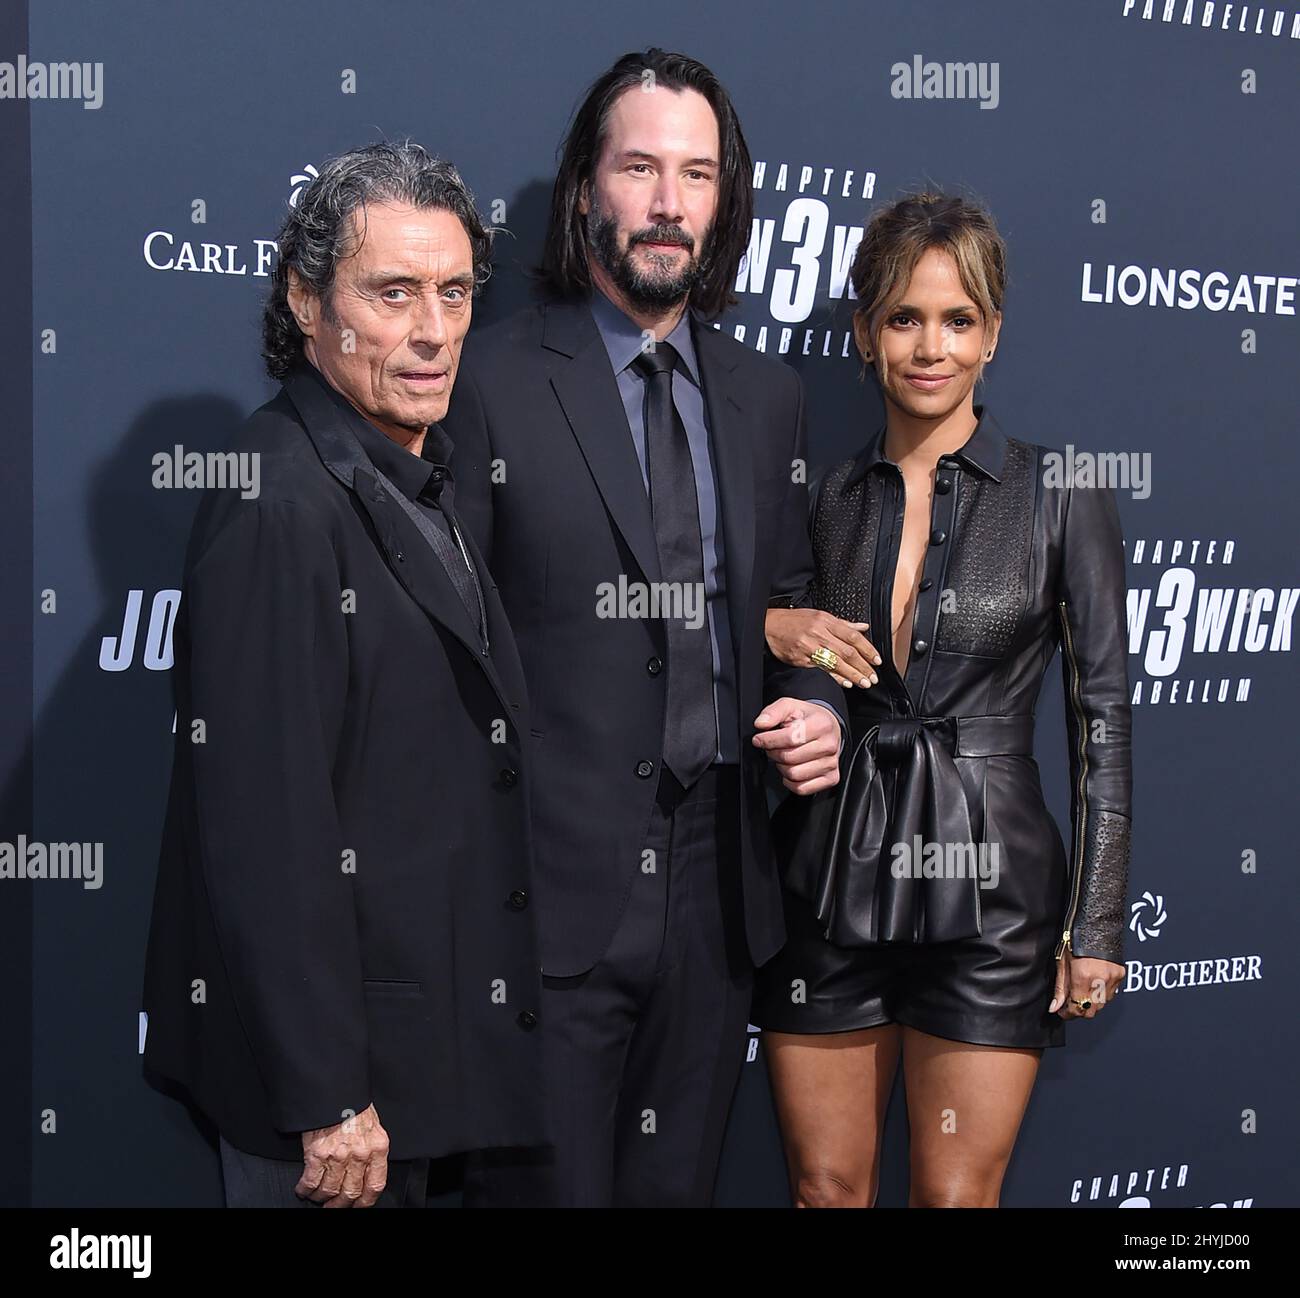 Ian McShane, Keanu Reeves and Berry at the L.A. special screening of "John Wick: Chapter 3 - Parabellum" held at the TCL Chinese Theatre Stock Photo - Alamy